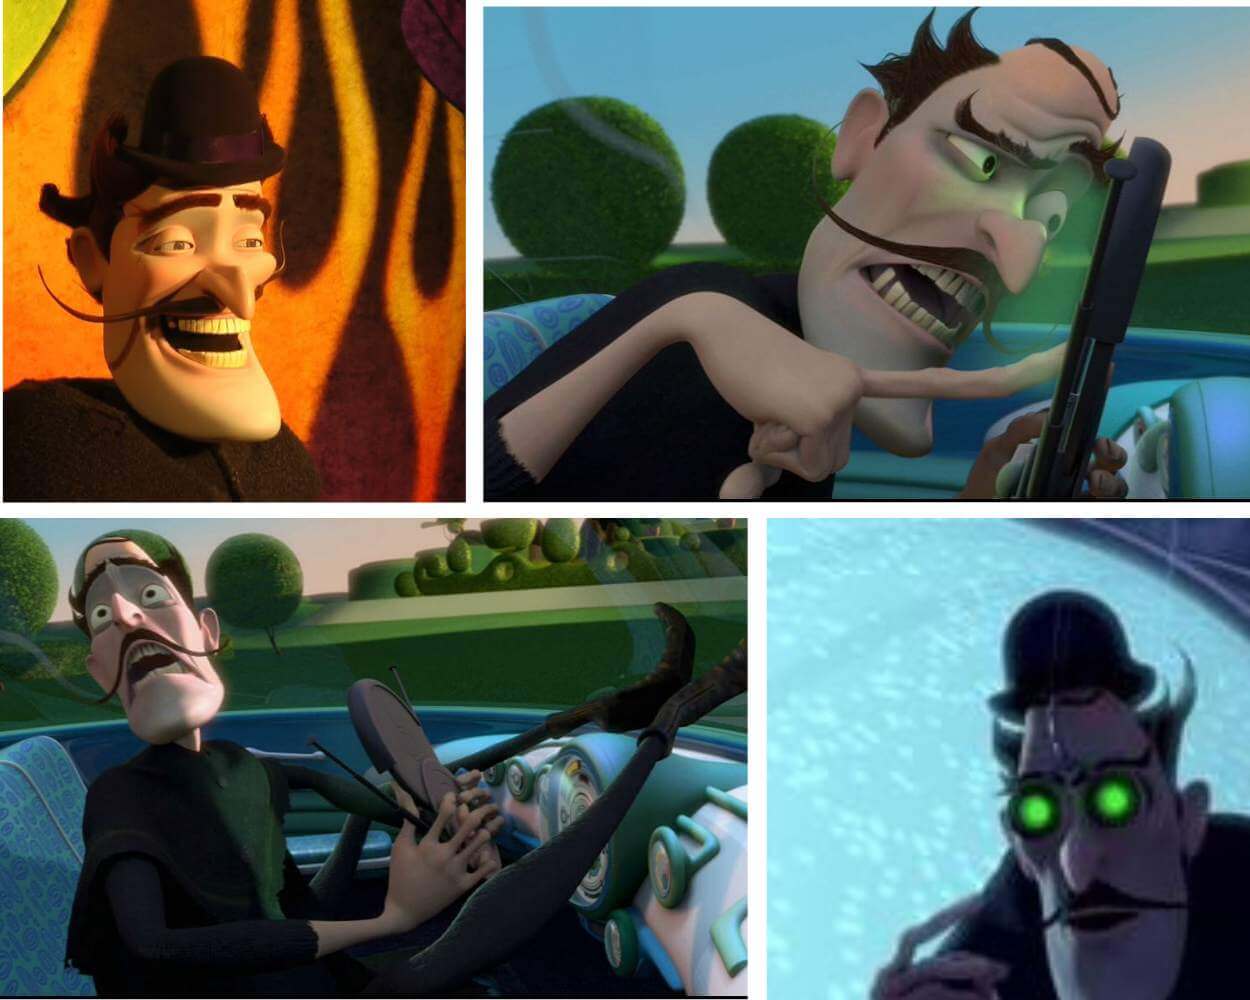 Meet the Robinsons Bowler Hat Guy's Role in the Film